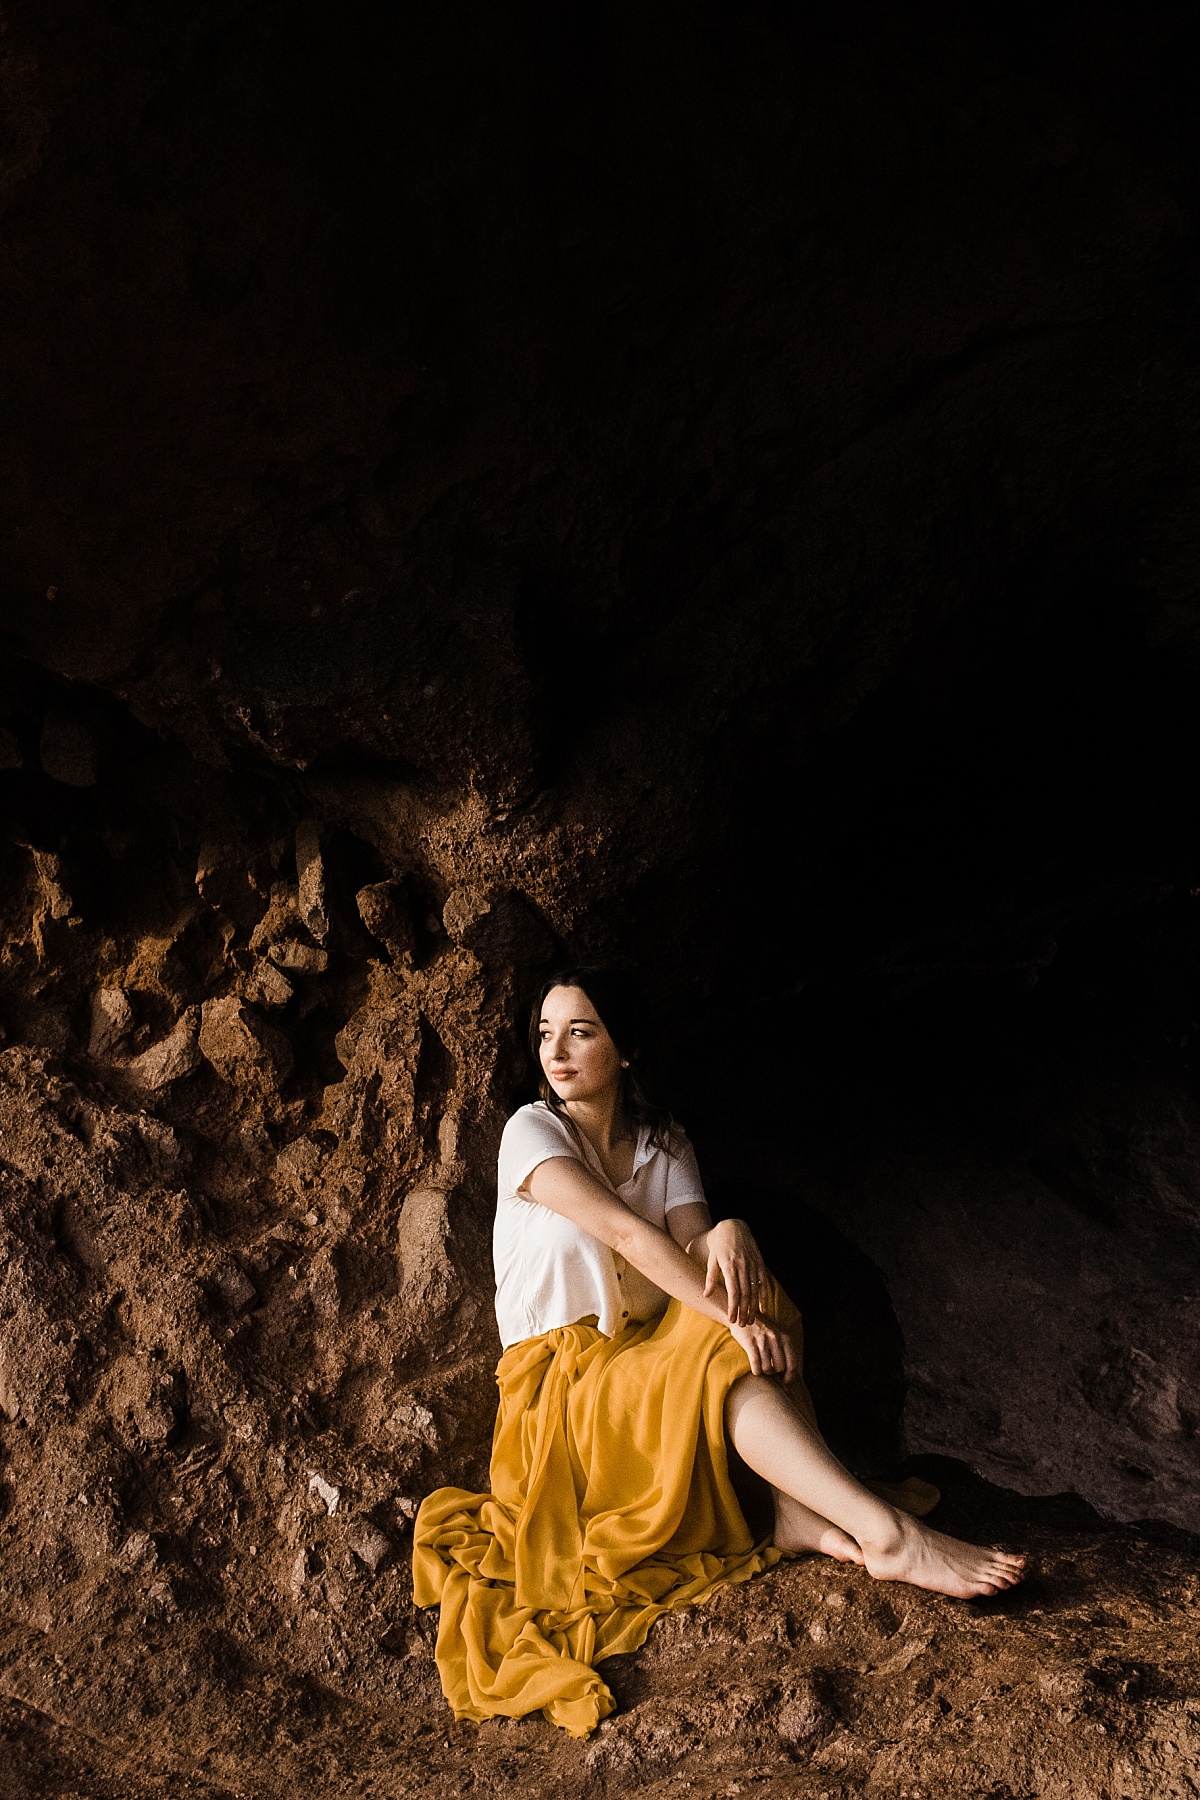 Pictures at Papago Park | Hole in the Rock | East Valley Photographer